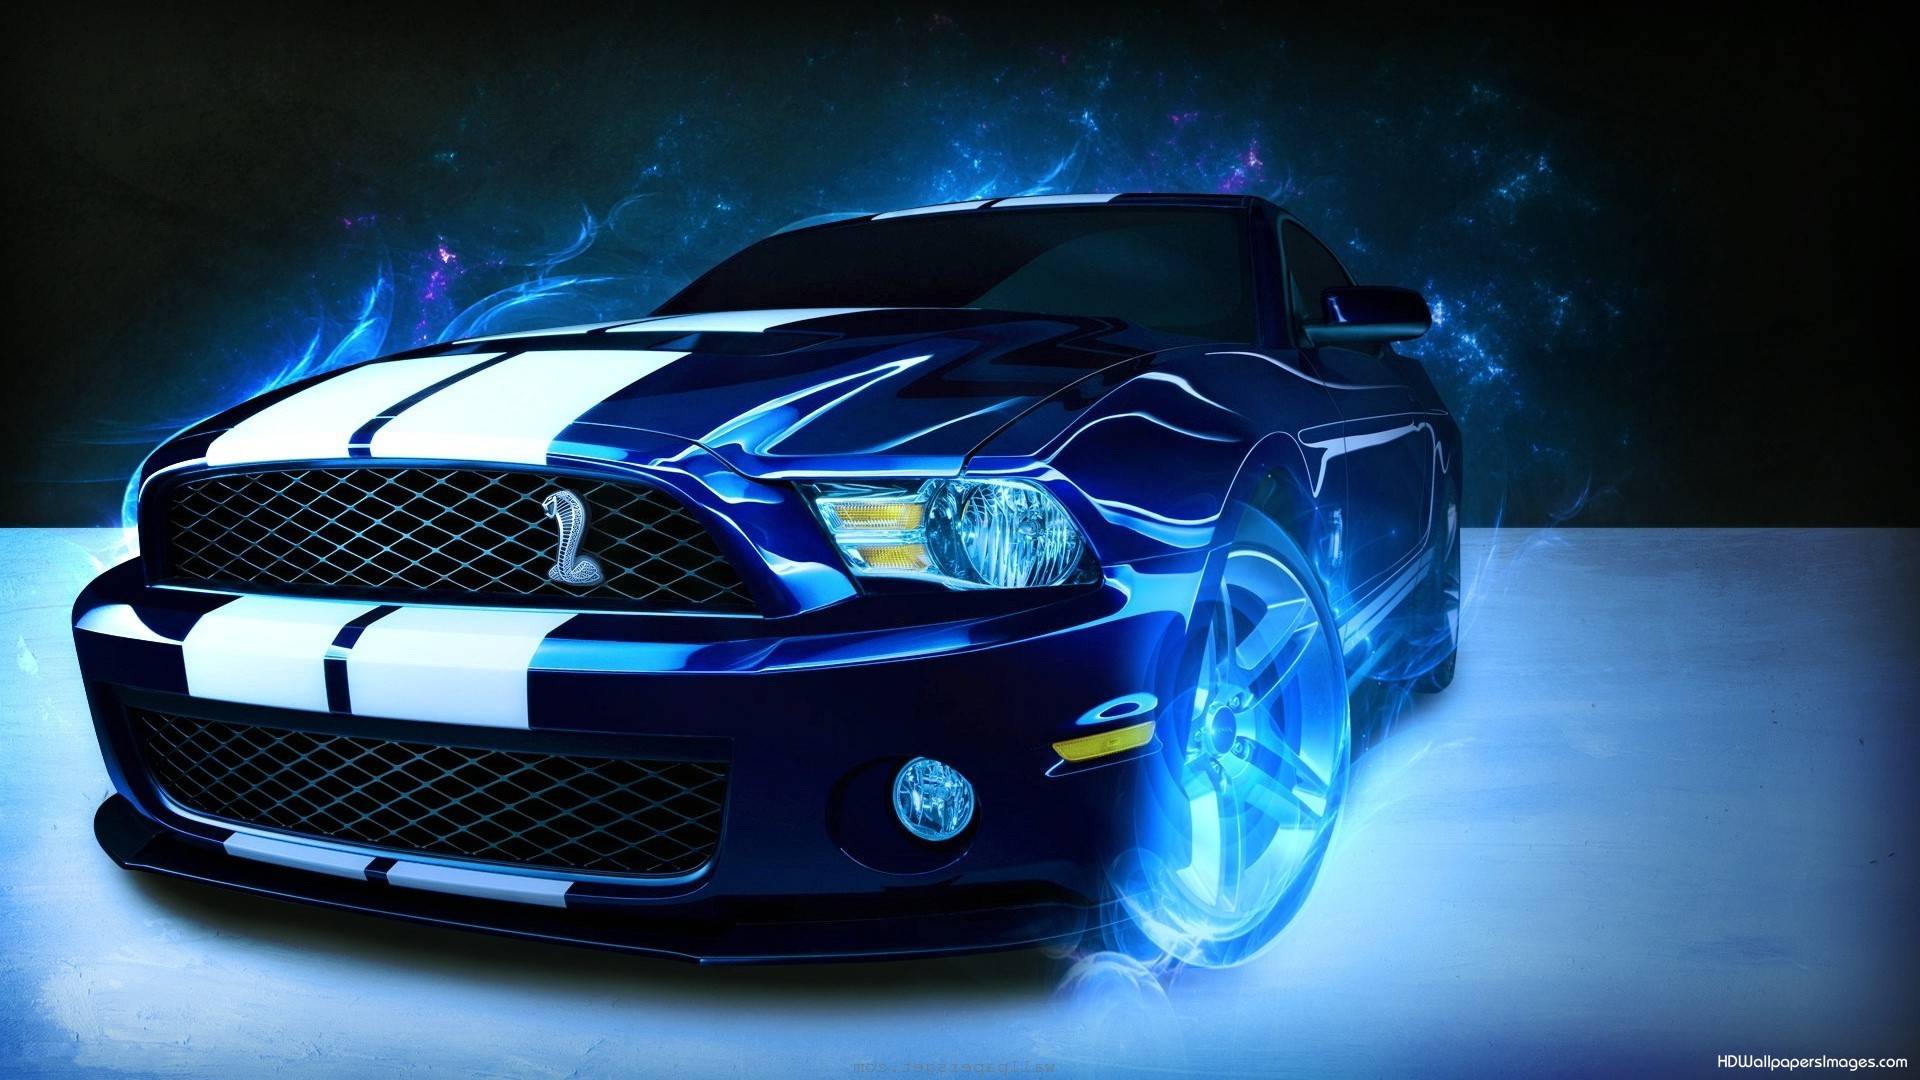 Free download Image for Ford Mustang Gt Wallpaper Ford Mustang Wallpaper Best [1920x1080] for your Desktop, Mobile & Tablet. Explore HD Mustang Wallpaper. Ford Mustang Desktop Wallpaper, Shelby Mustang